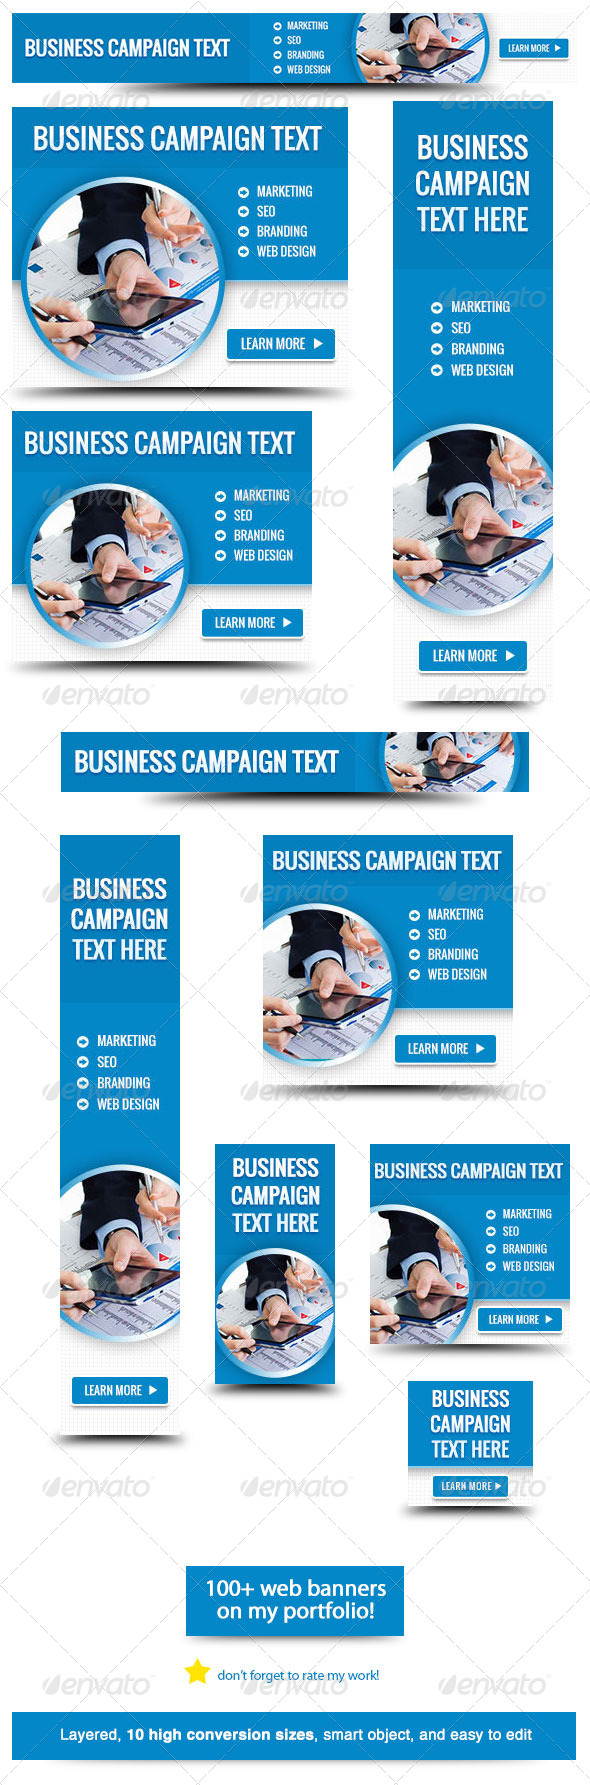 Corporate Web Banner Design Template 33 (Banners & Ads)